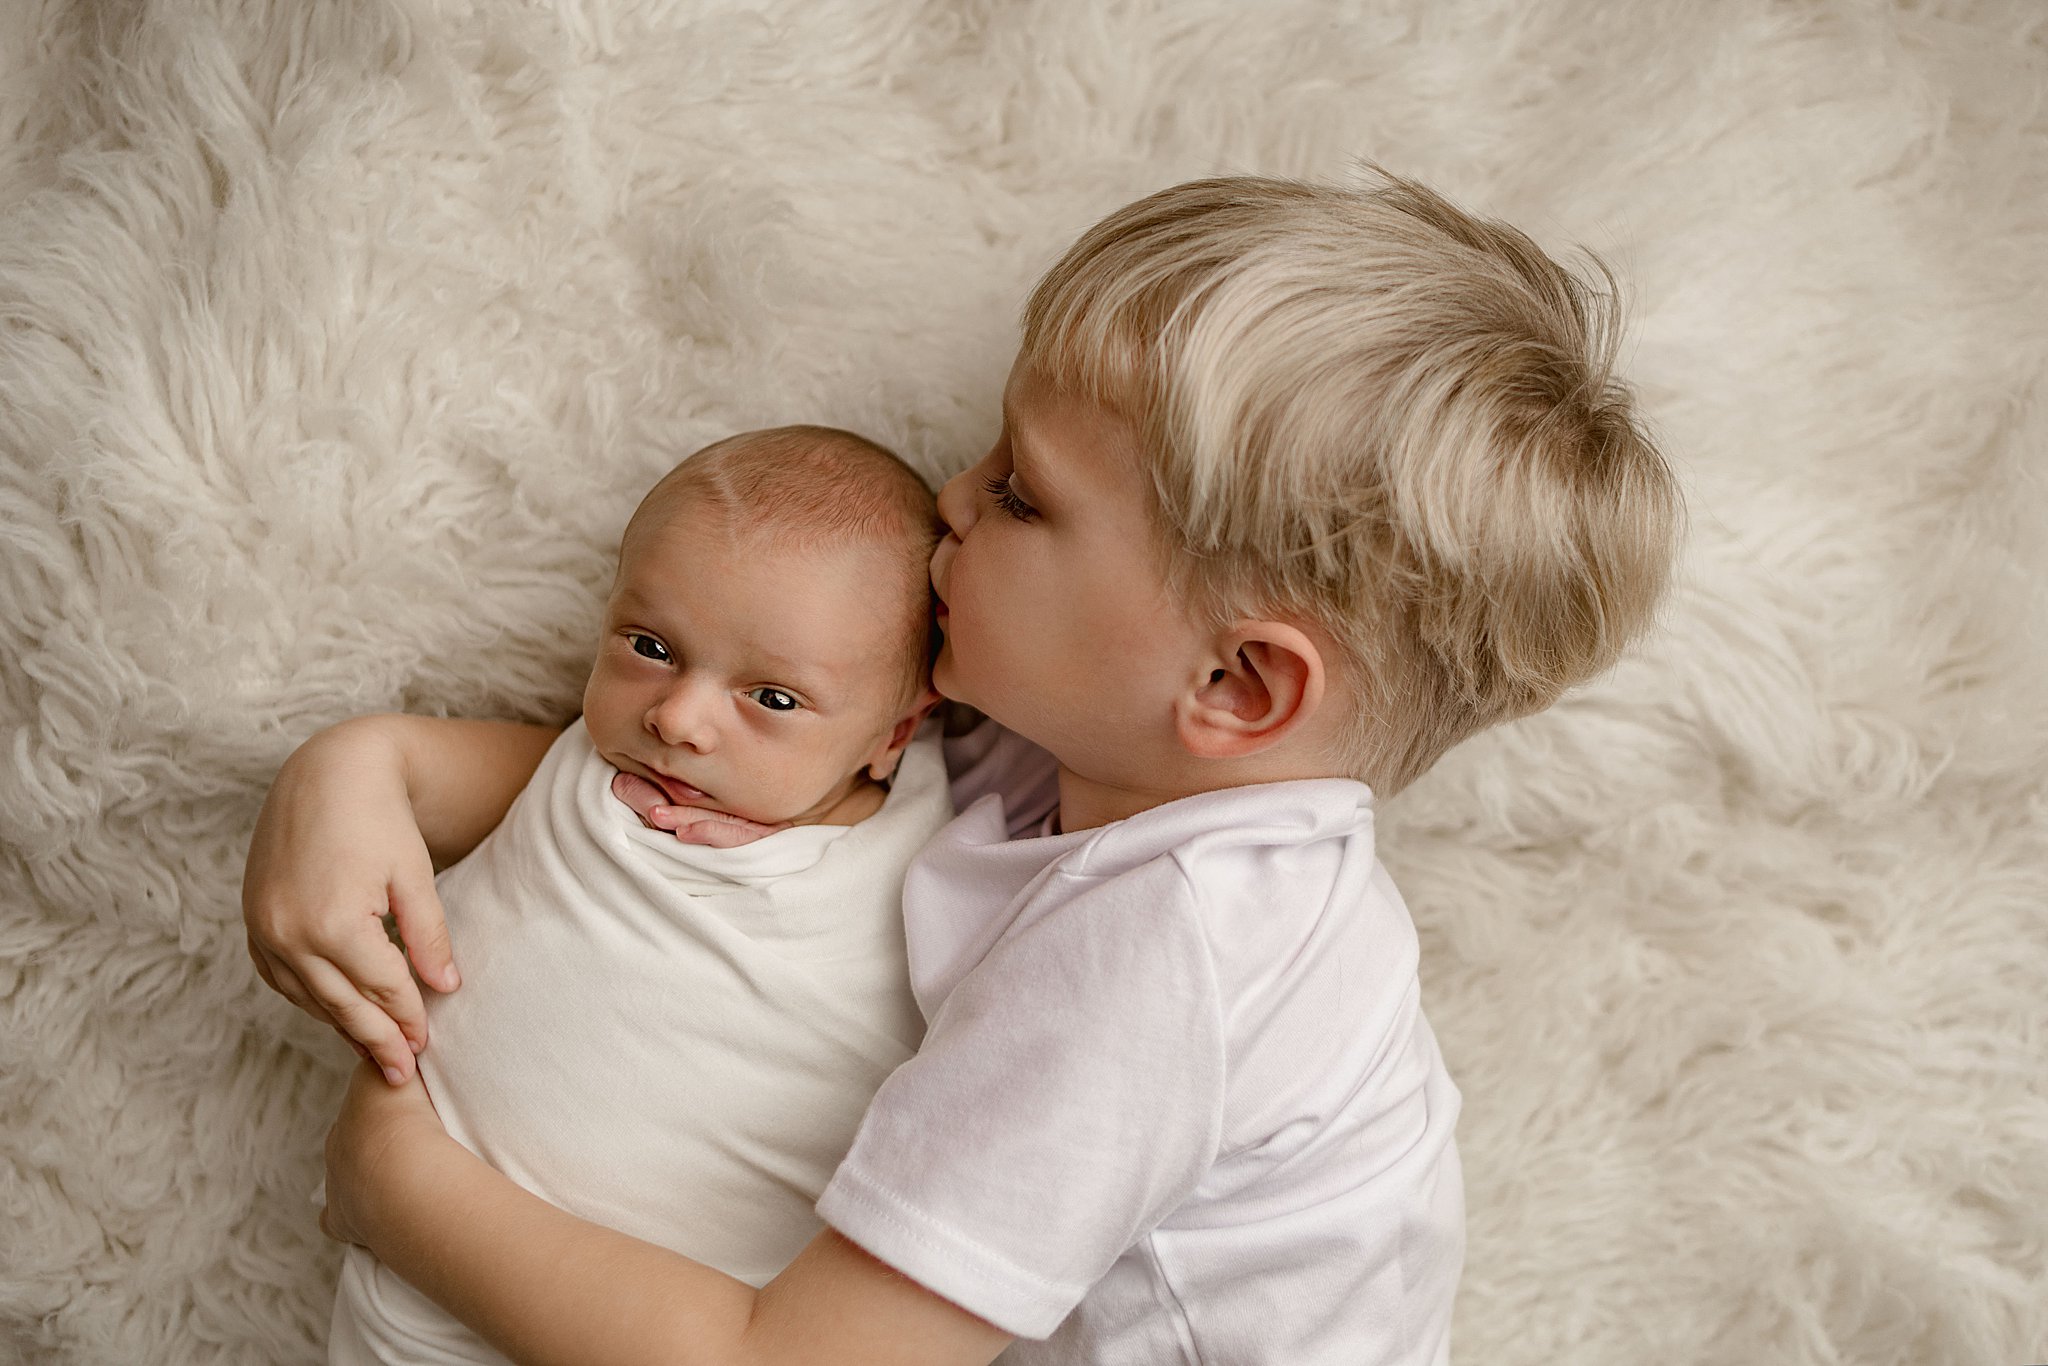 Big brother hugs and kisses newborn sibling on the head nashville nanny